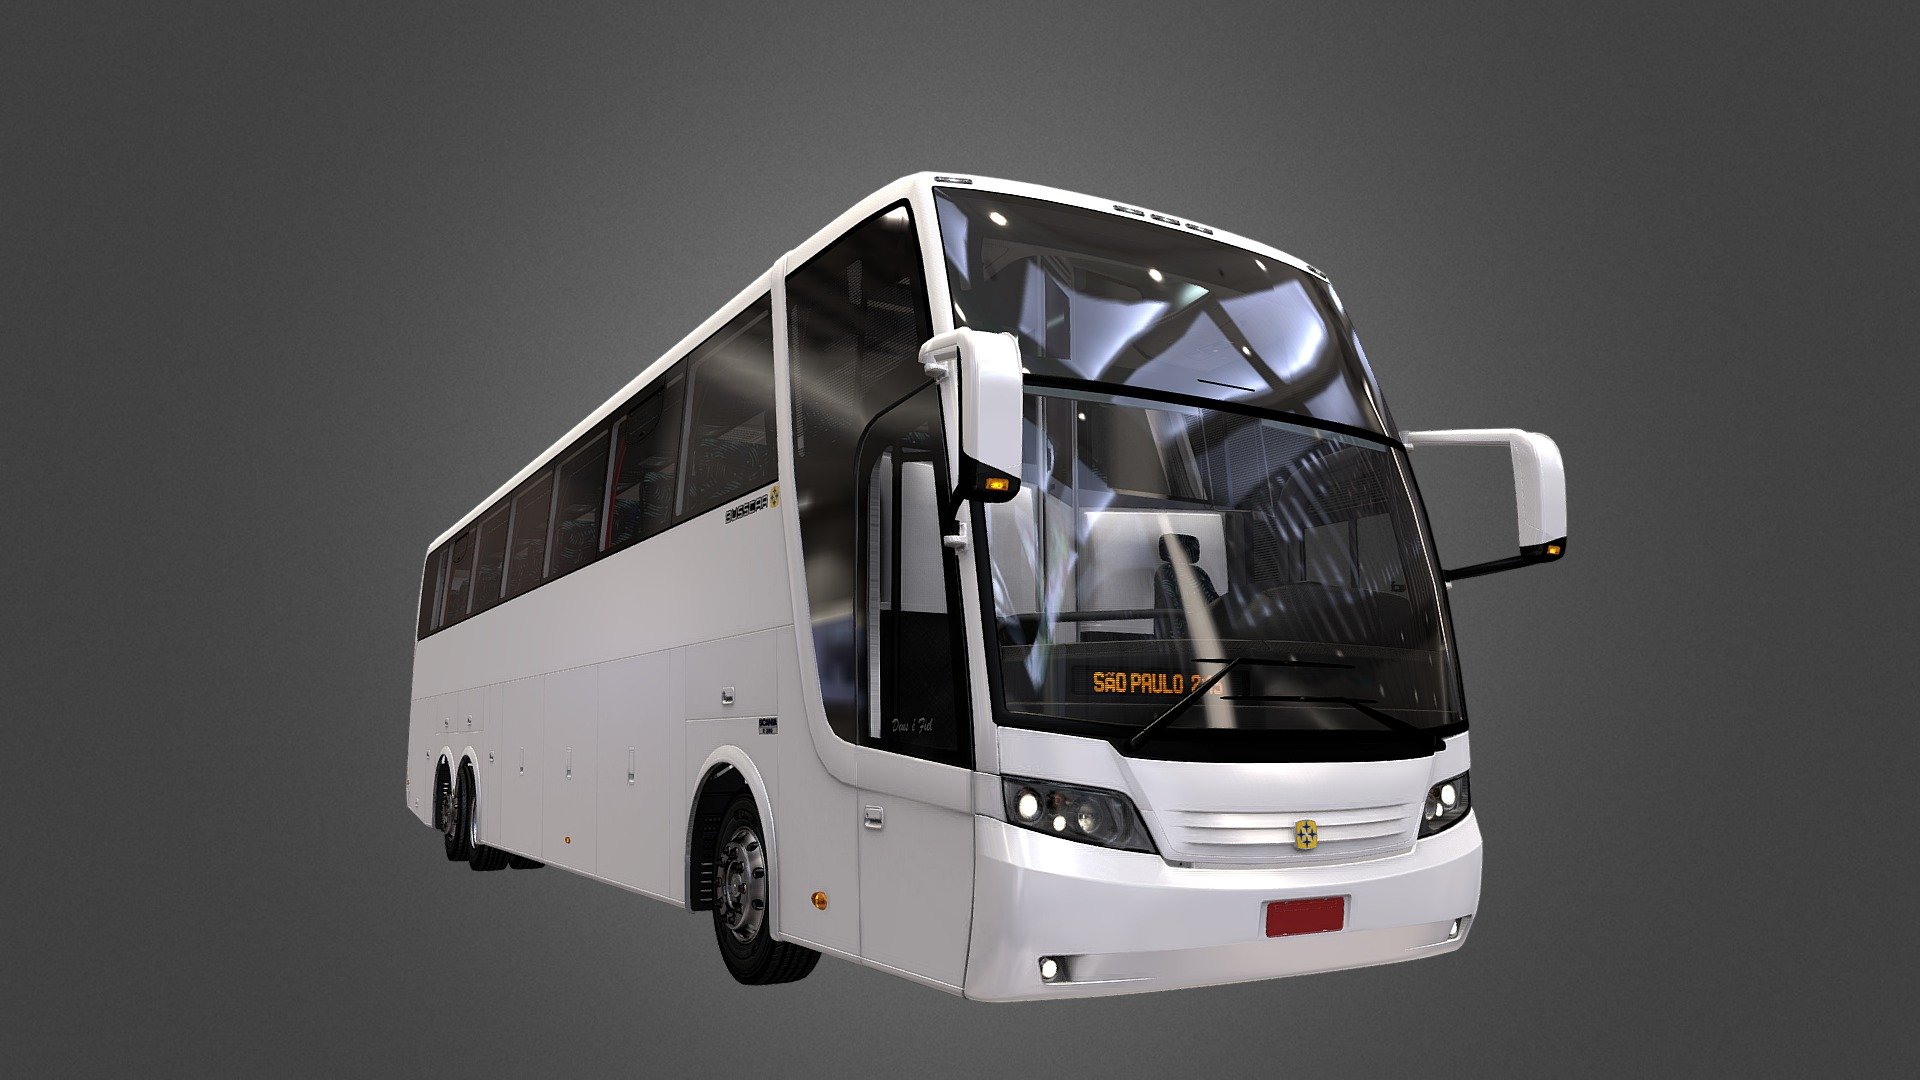 This model was produced by Busscar S.A. in Brazil in the generation of coach bodys called &lsquo;'Mars'&lsquo;, launched in 2001 with the status of one of the best coach bodys on the market, they have clean and innovation lines for his time, and this body generation was a huge selling success!
This particularly model is the Jum Buss 380, the most high decker before beeing a low driver coach, wich will be the Jum Buss 400.We can say that  generation have just one facelift, in 2007 wich is the model you're seeing; Busscar changes all the headlights and interior lighting by LED technology and a few outside bodywork for more cleaner lines like remove sealing rubbers from the windows, remove the luggage line high profile, a new foglight design and various other minors changes wich just made the product even better! 
Unfortunately a &lsquo;'process'&lsquo; of crisis started in 2009, led by a bad administration; and this crisis dragged until 2012 when came to bankruptcy.

High poly and fidelity model by Enzo Caldeirini - Jum Buss 380 Scania 2007 - 3D model by Enzo Caldeirini (@enzocaldeirini) 3d model